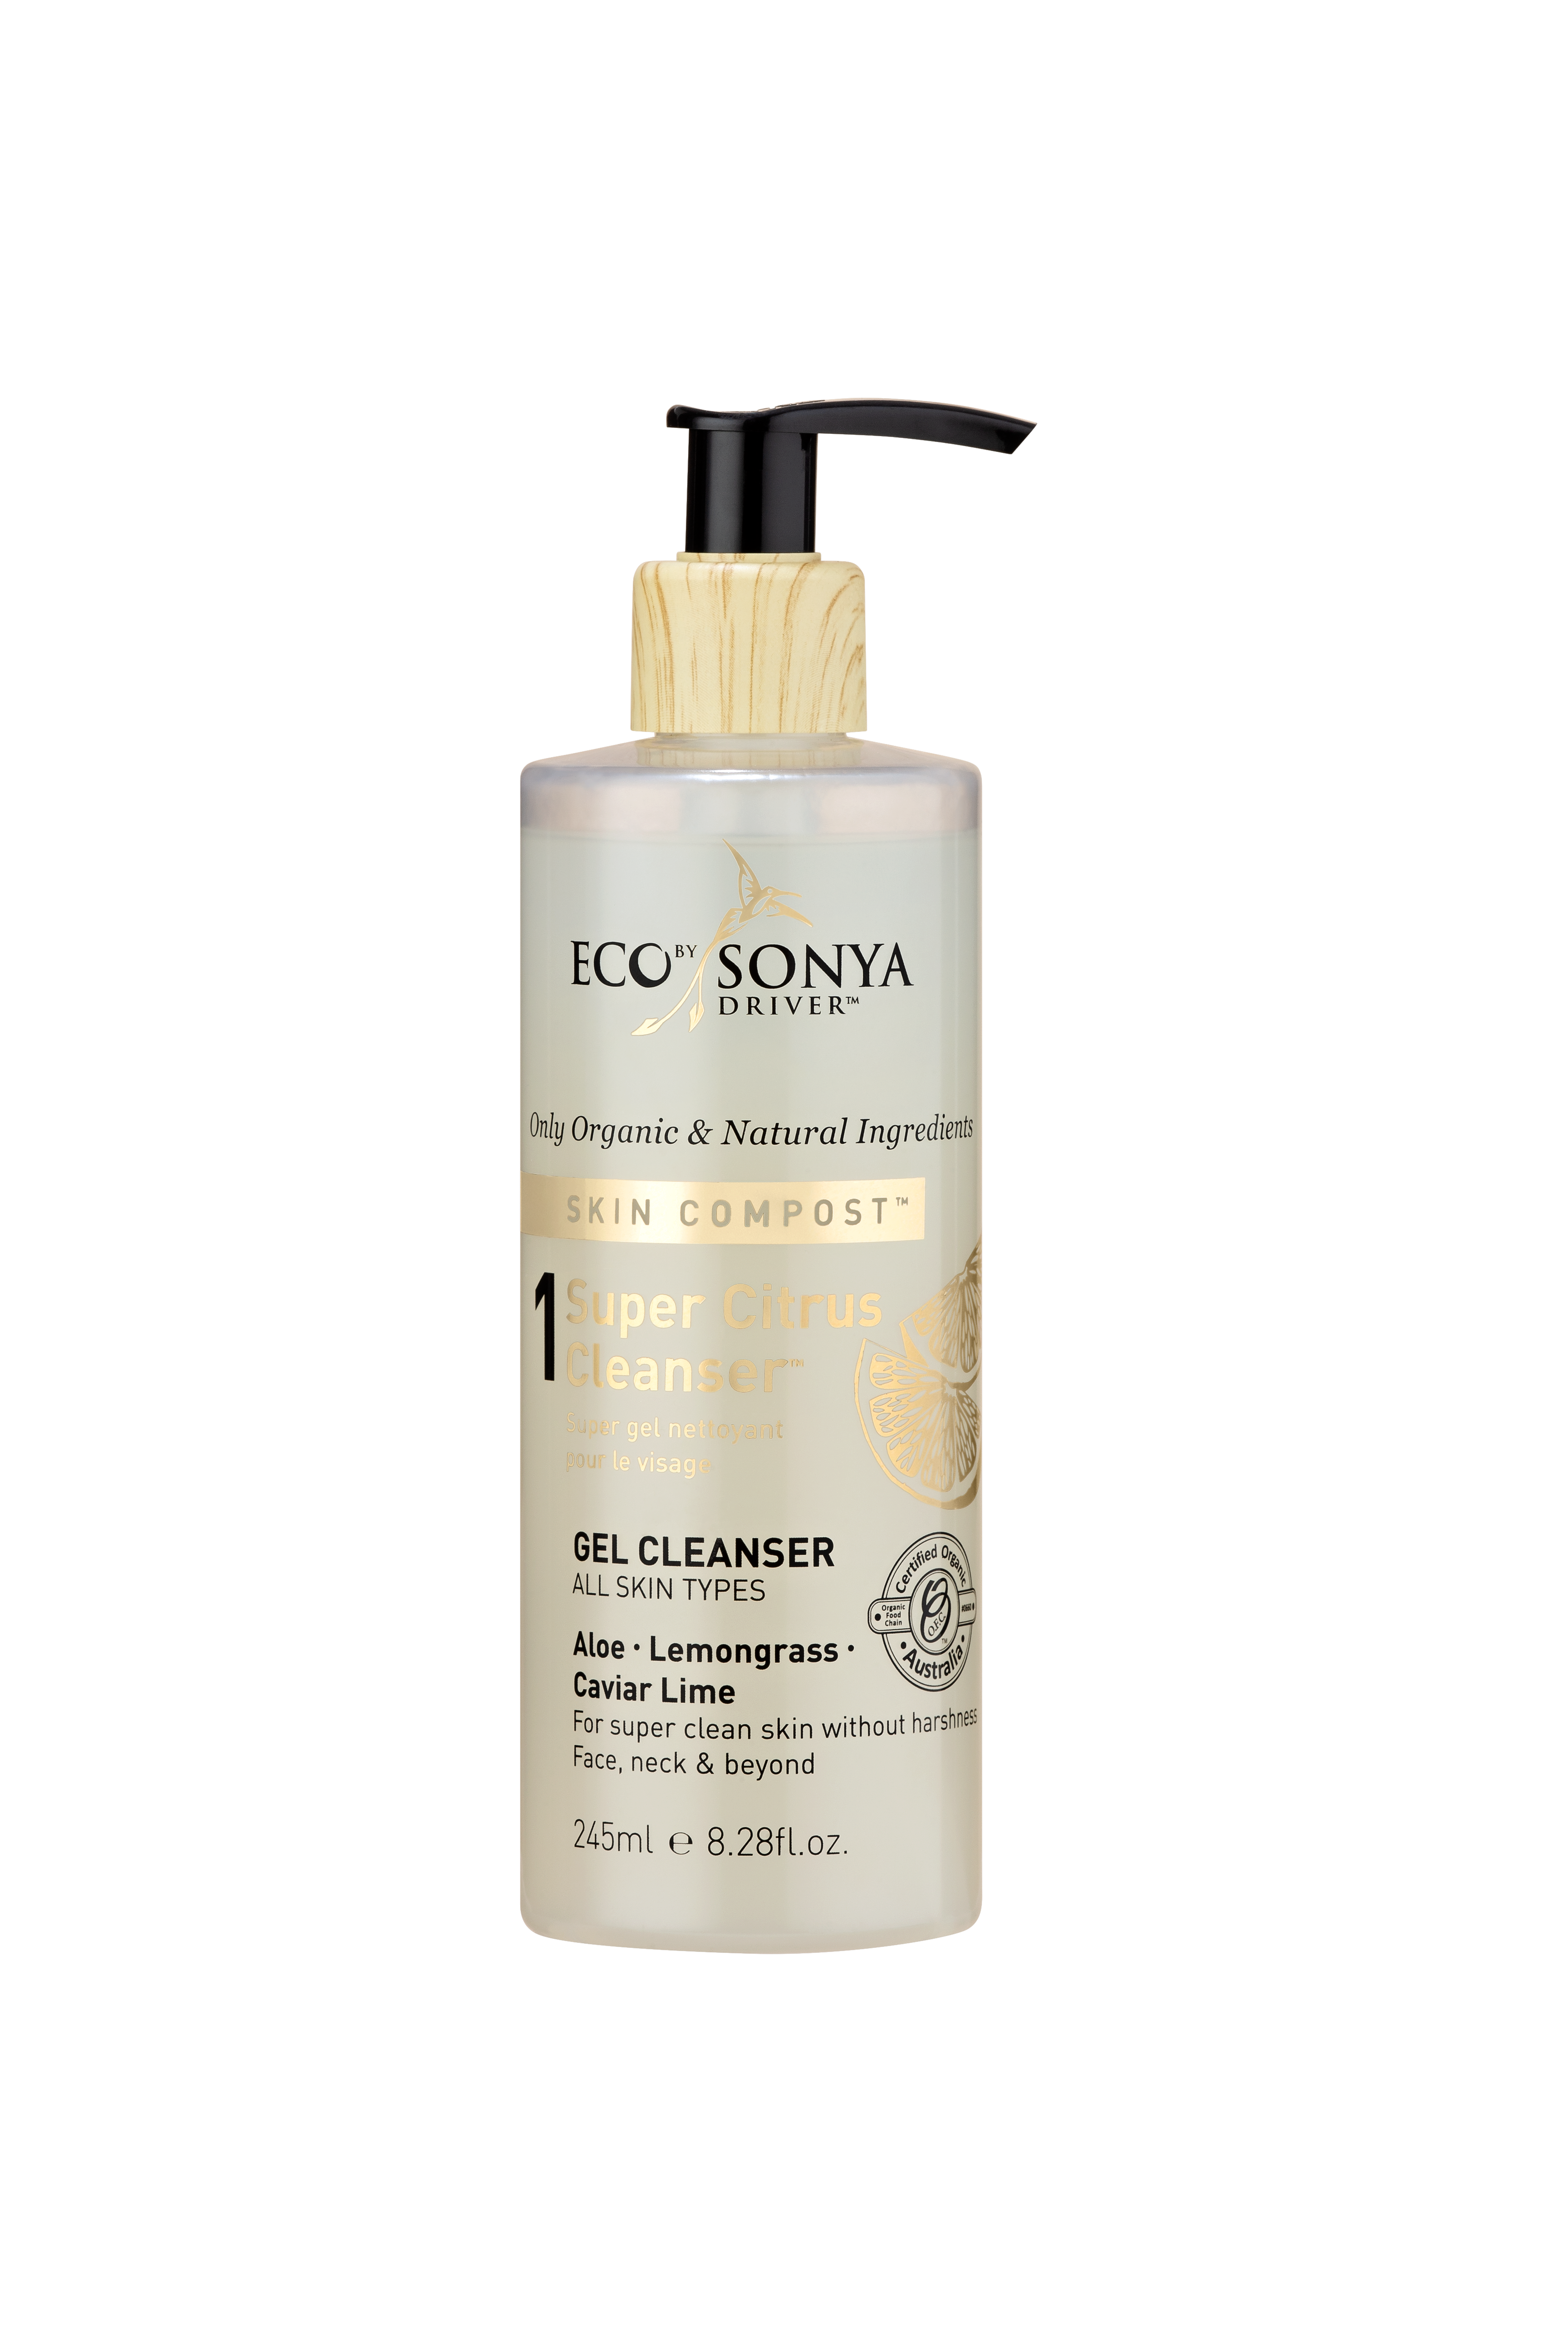 Eco by Sonya Driver - Super Citrus Cleanser